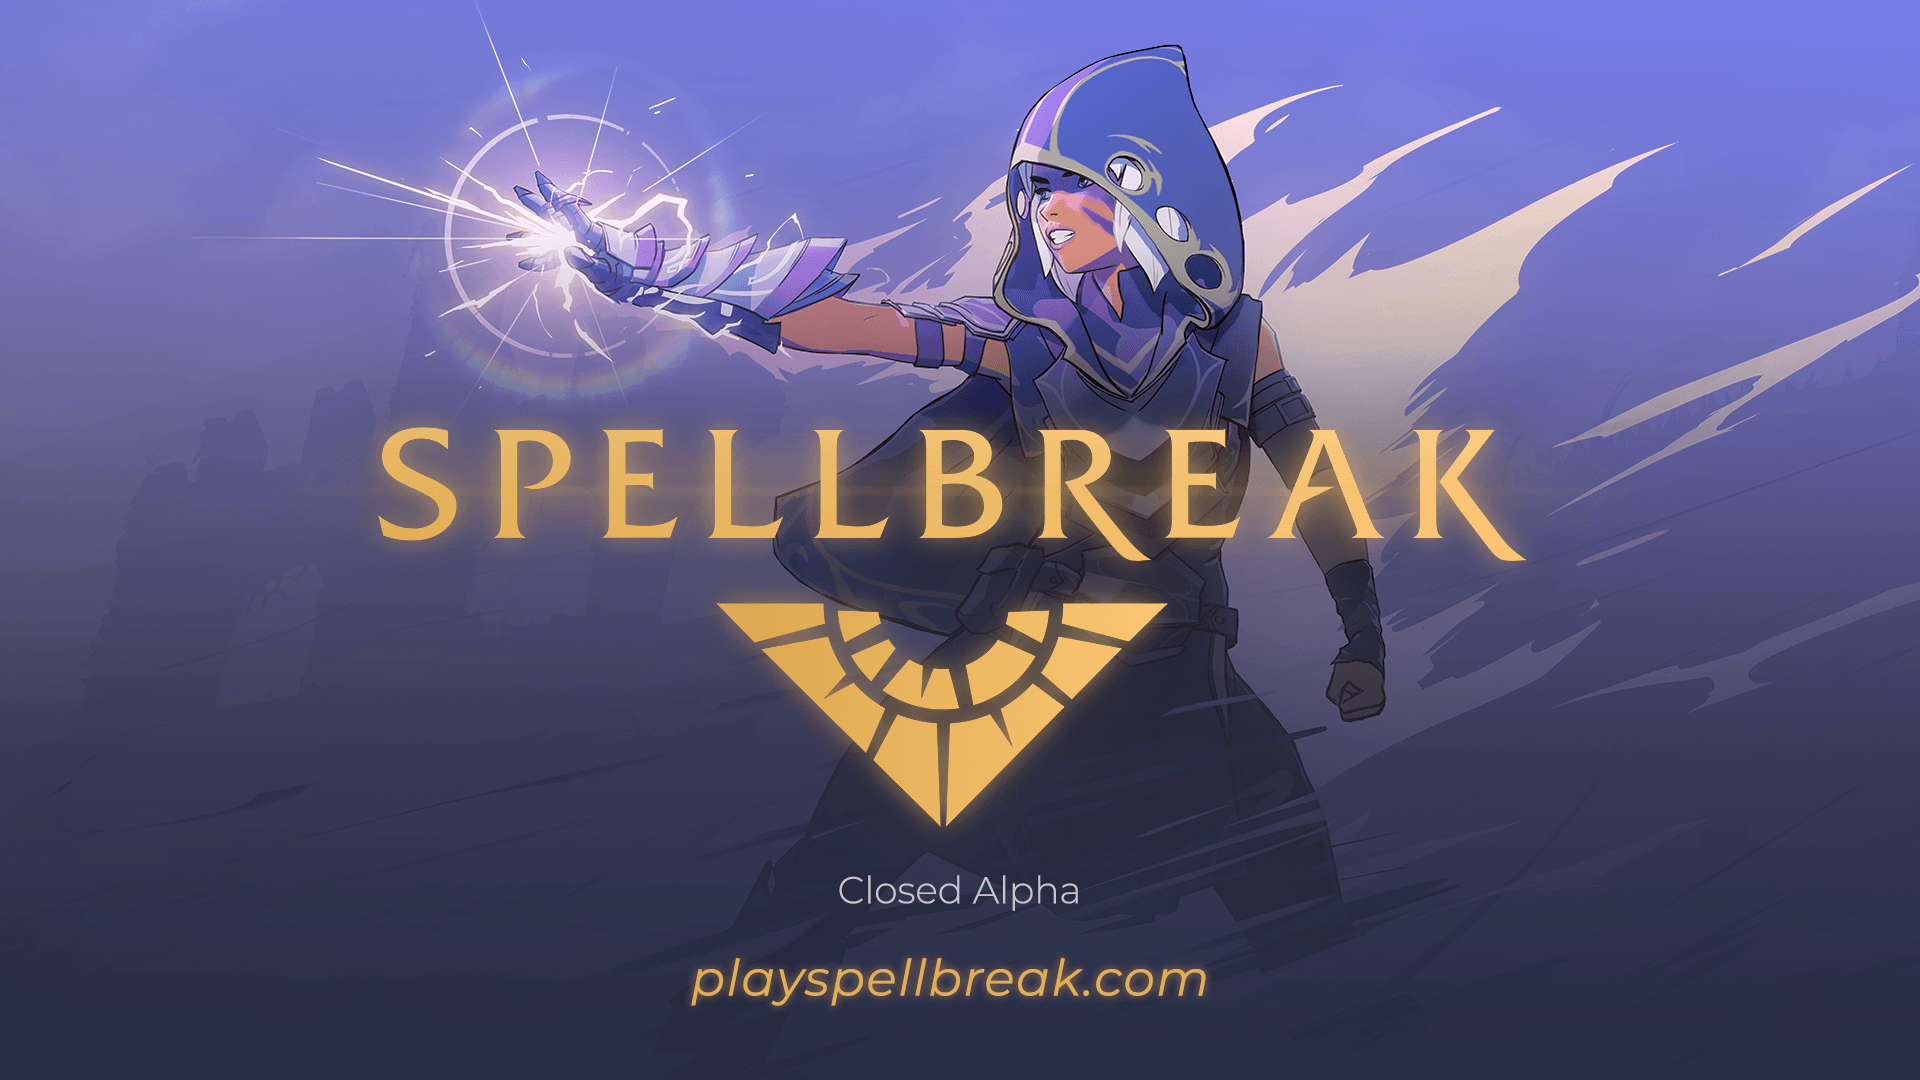 Spellbreak is now in Closed Alpha and the NDA has been lifted